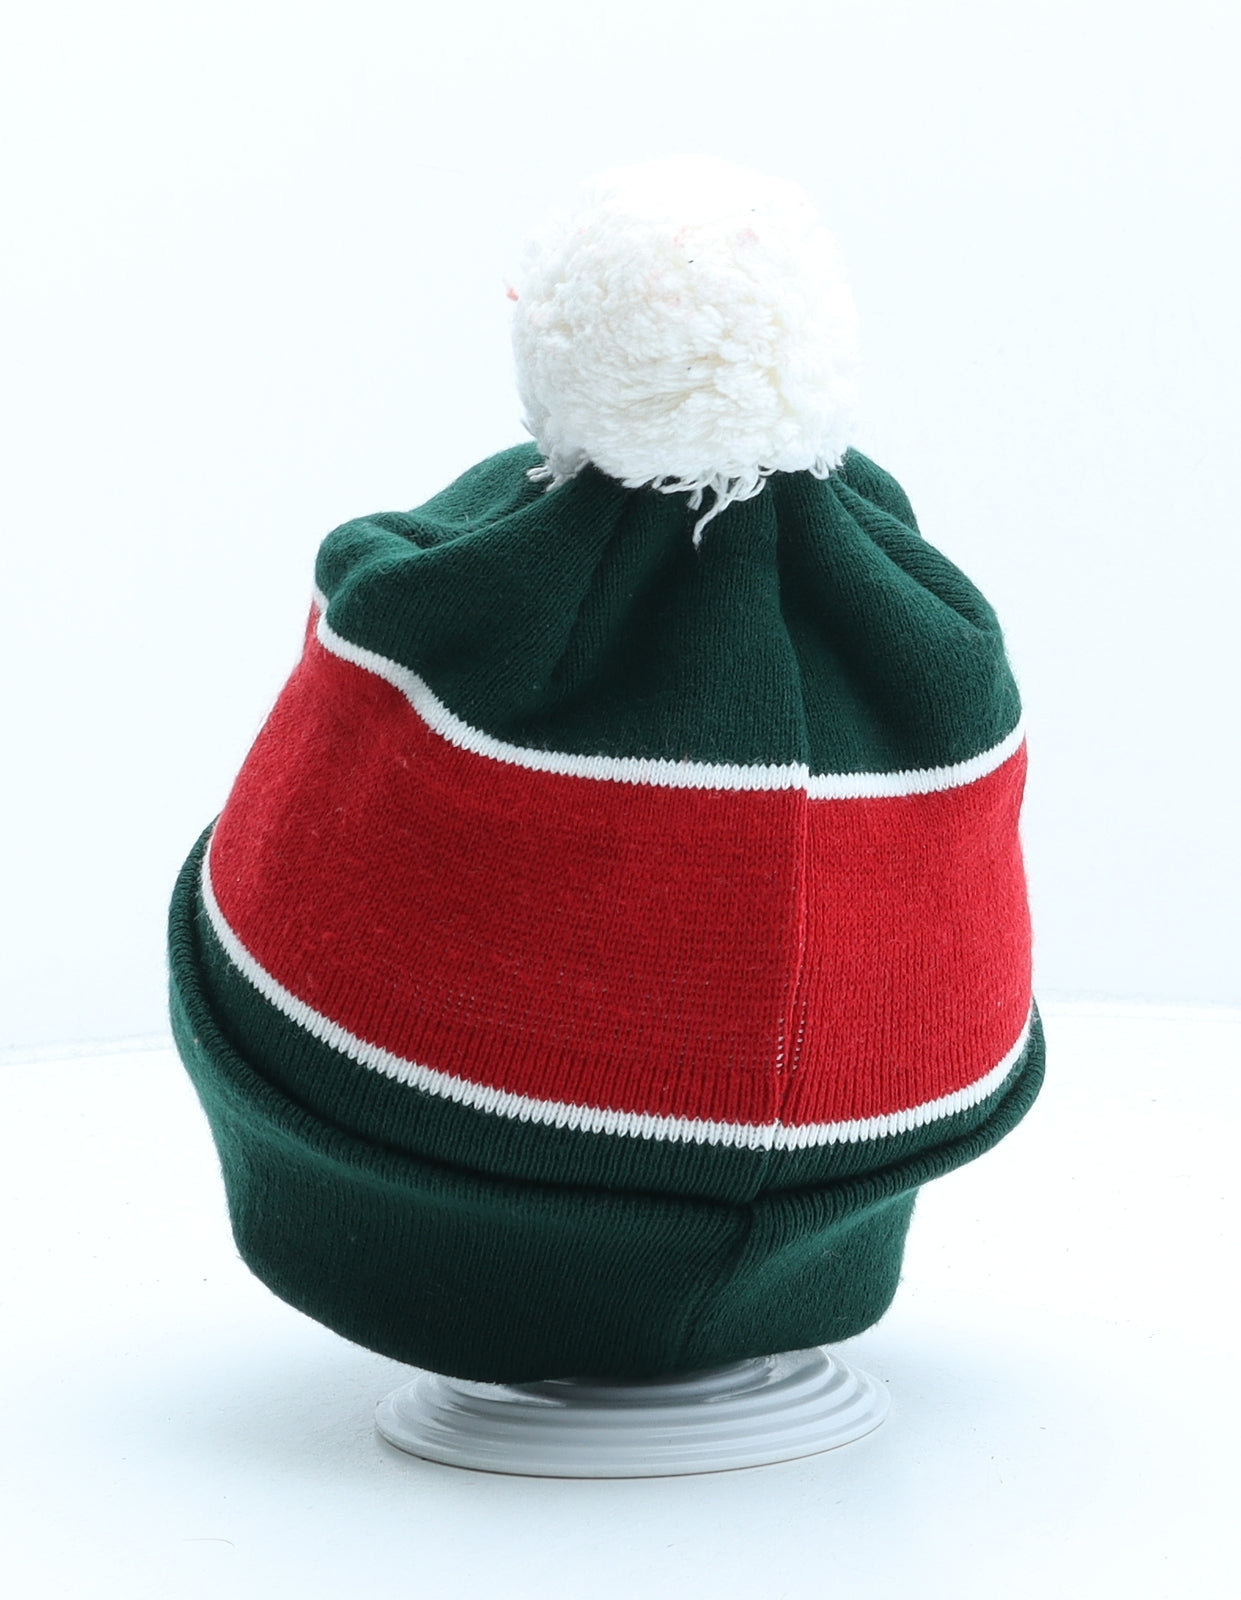 Leicester Tigers Mens Green Striped Acrylic Beanie One Size